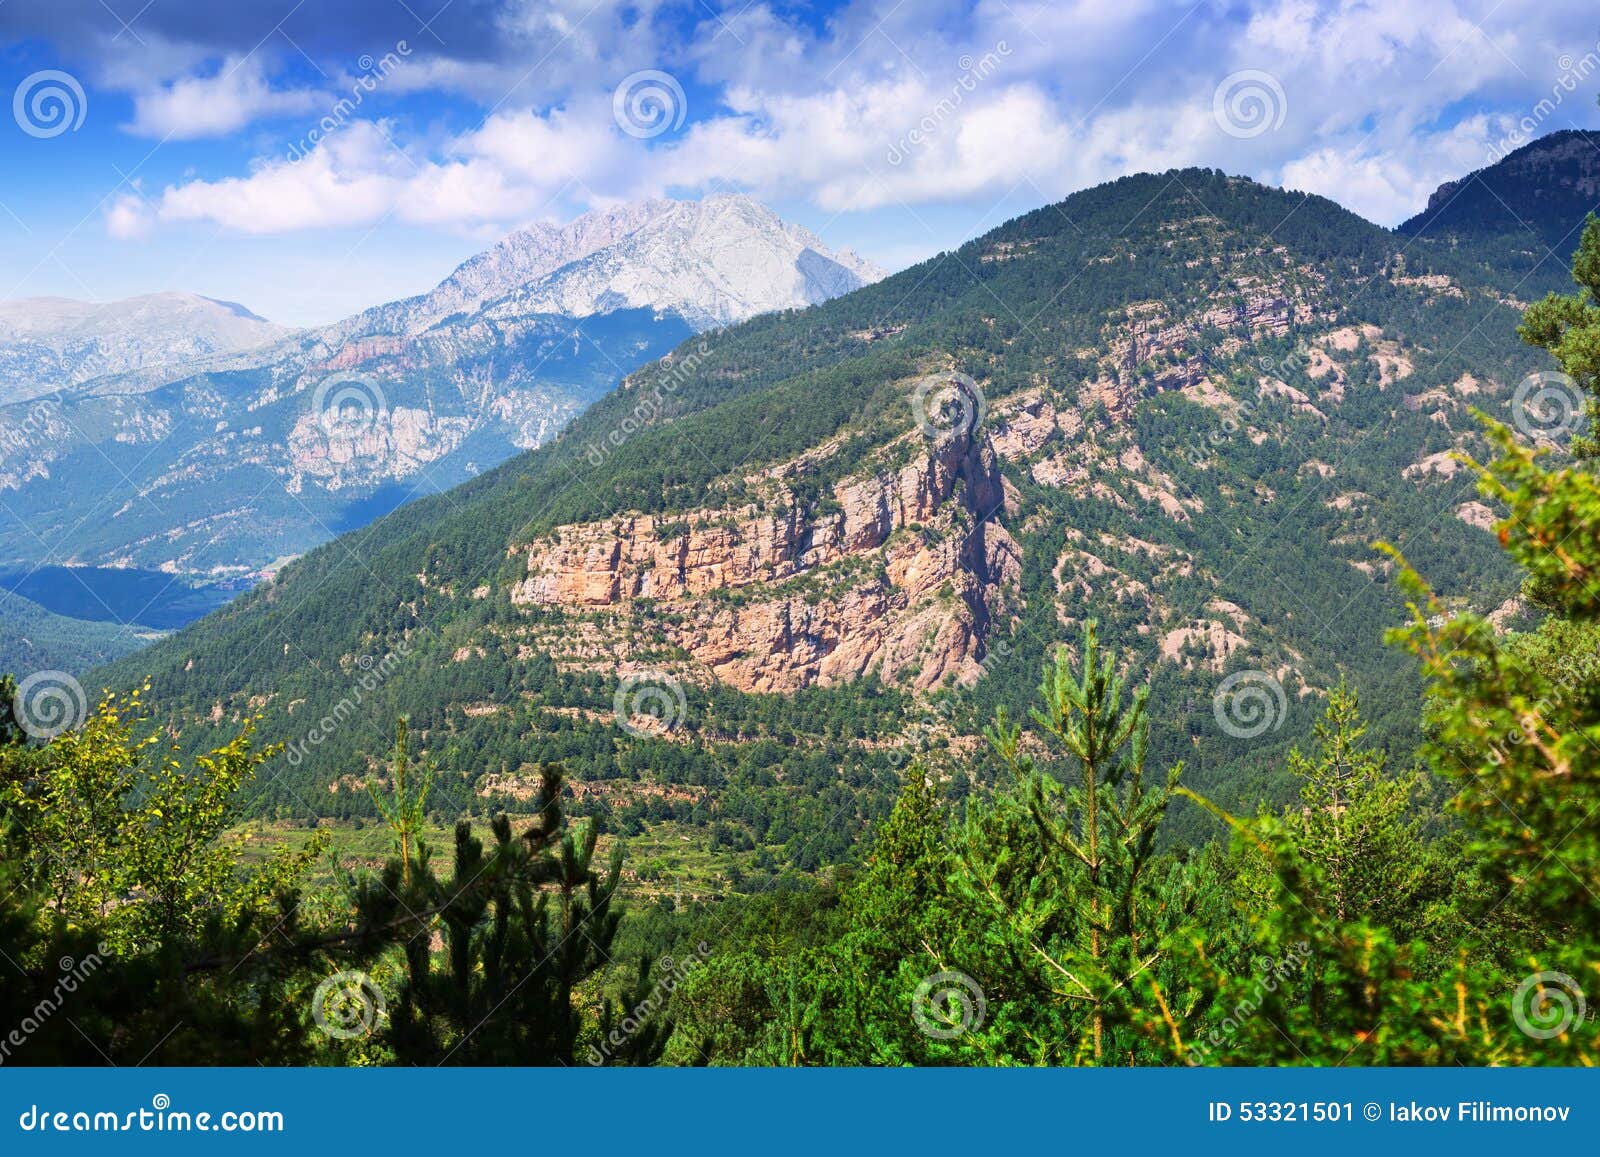 general view of mountains landscape